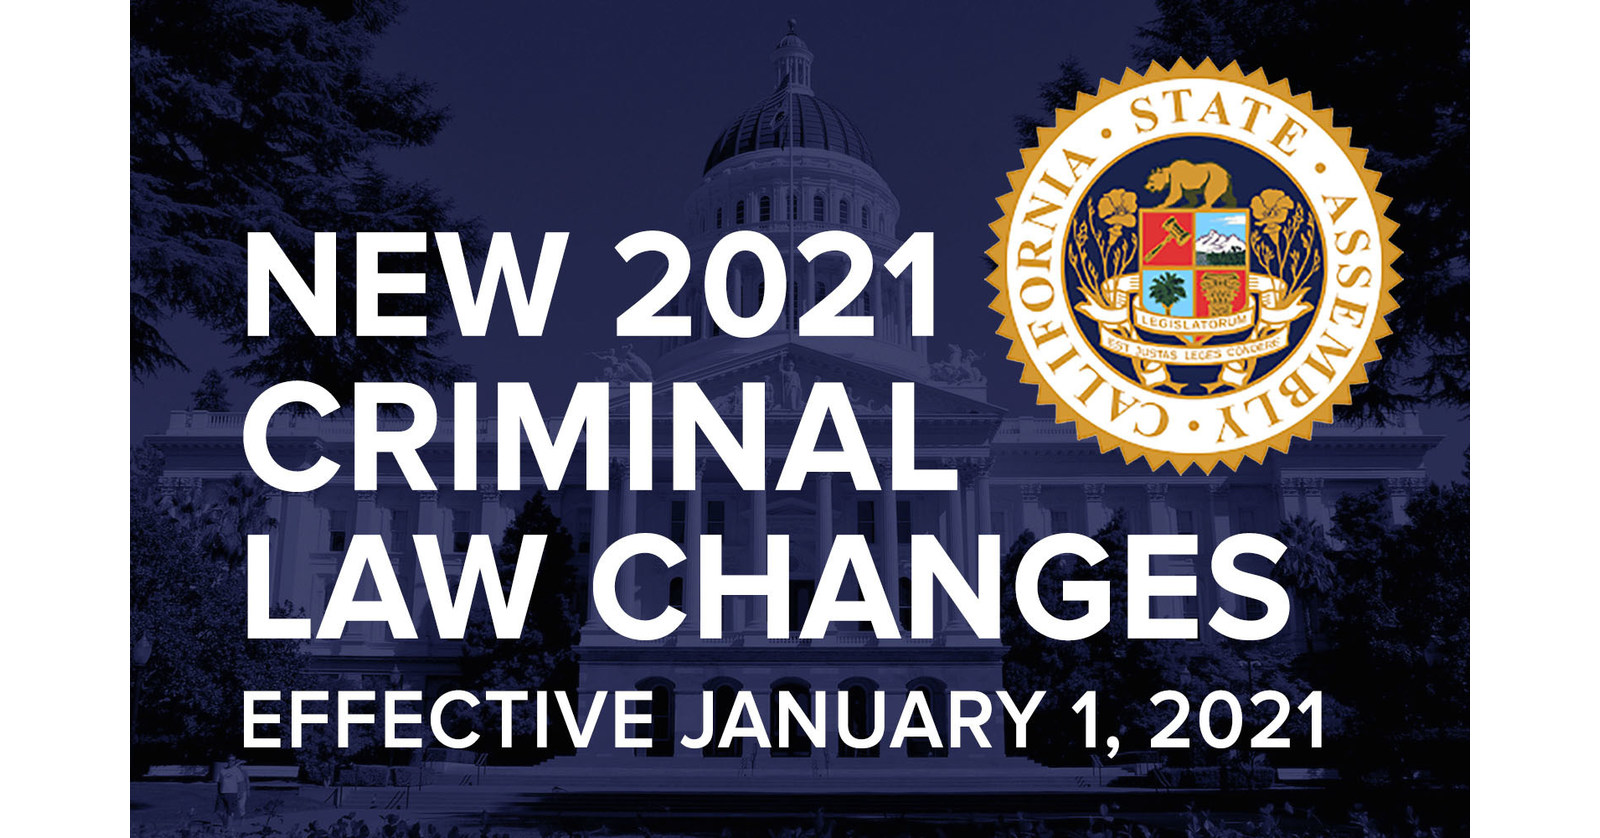 Guide to New 2021 California Criminal Law Changes